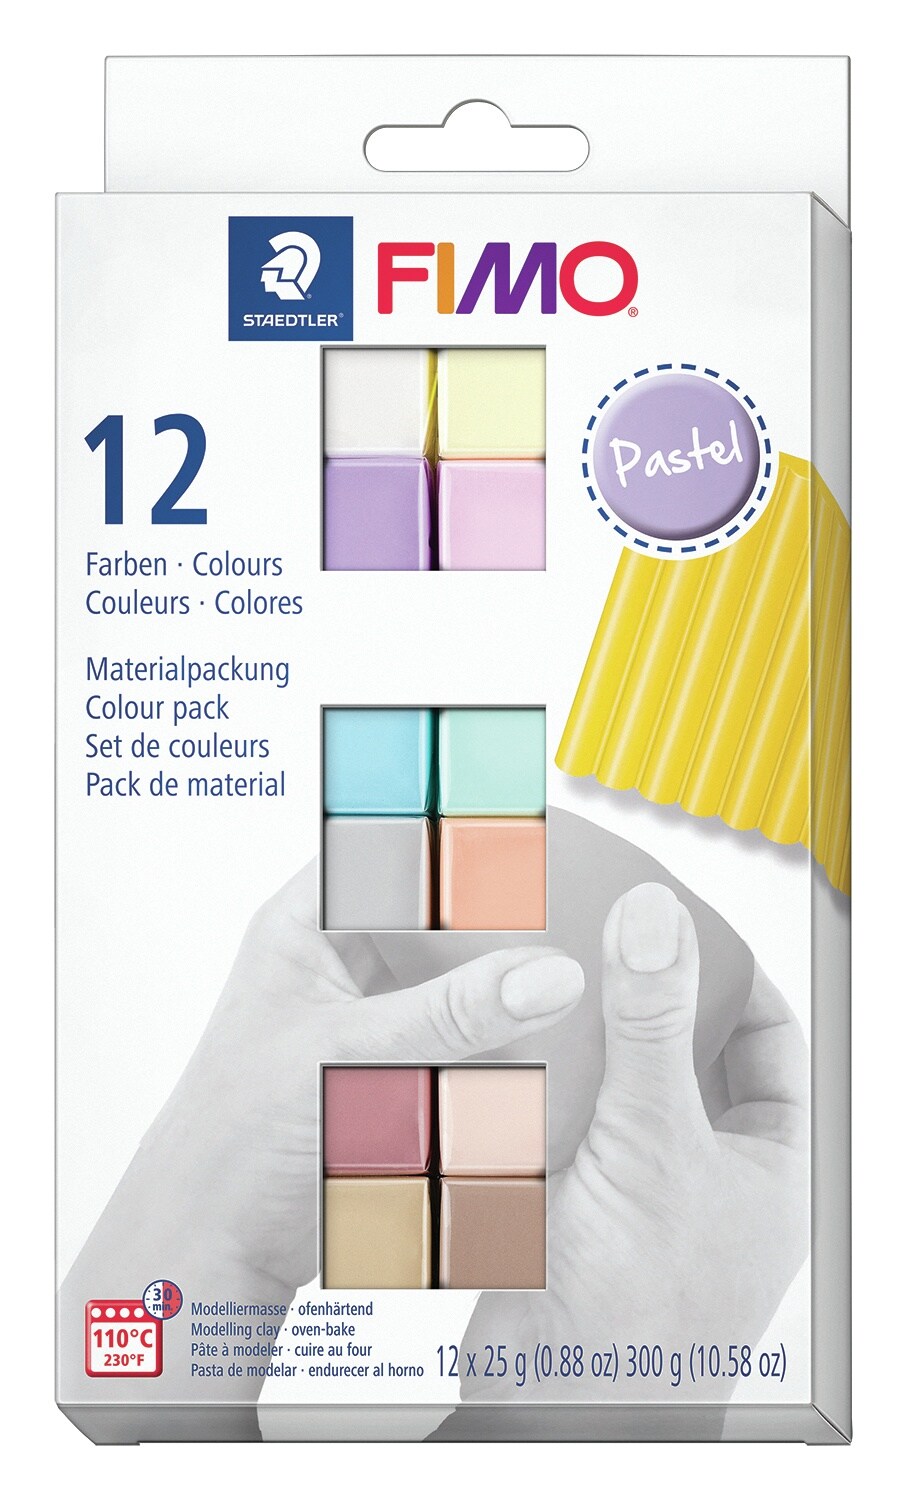 Fimo Professional Soft Polymer Clay 12/Pkg-Pastel